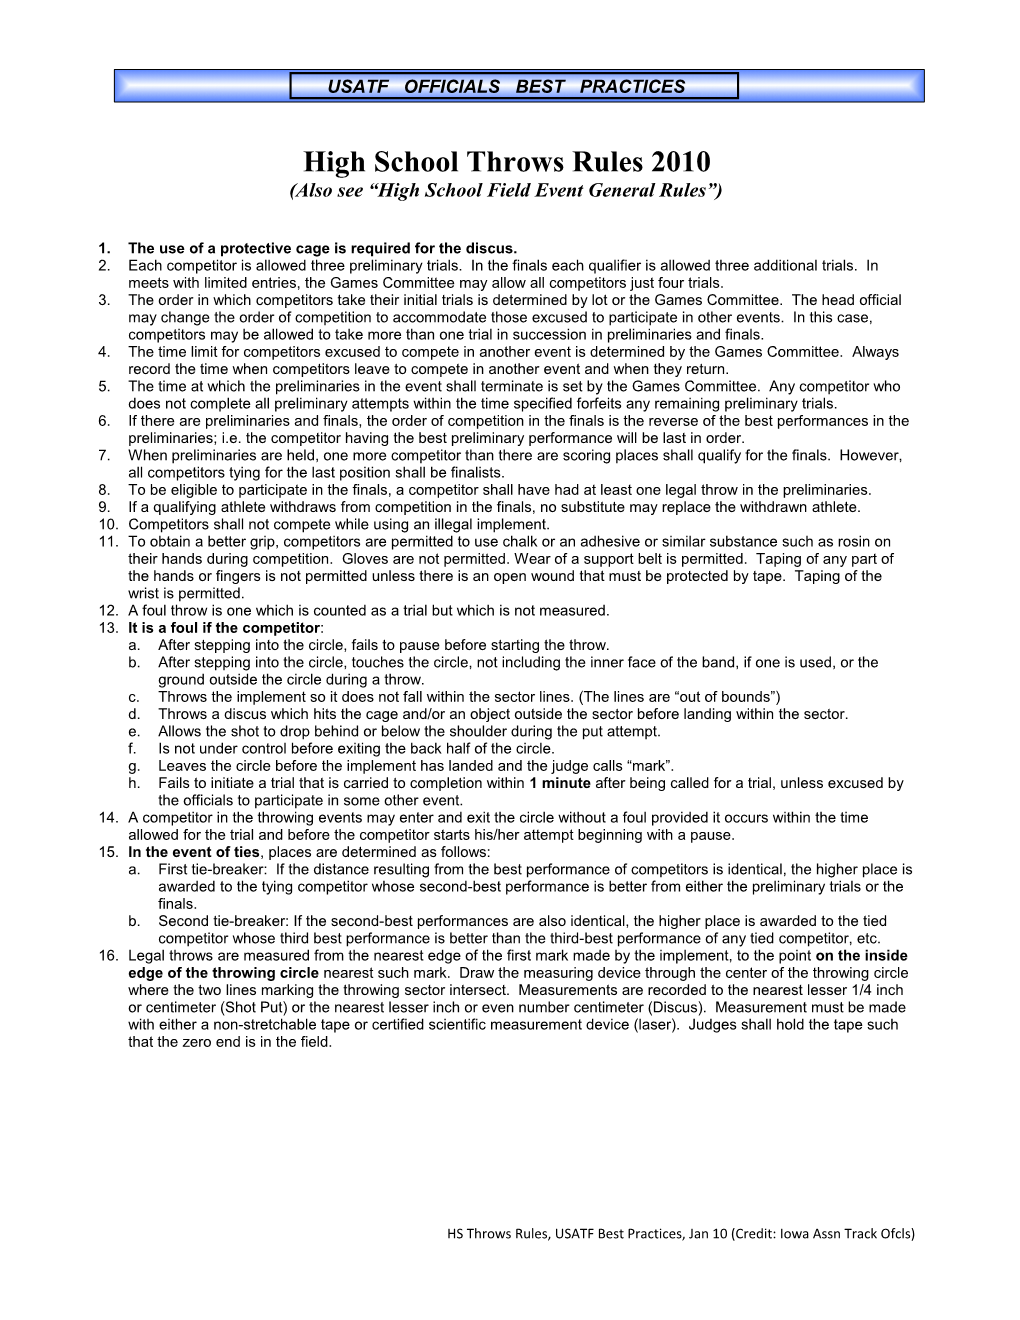 Also See High School Field Event General Rules